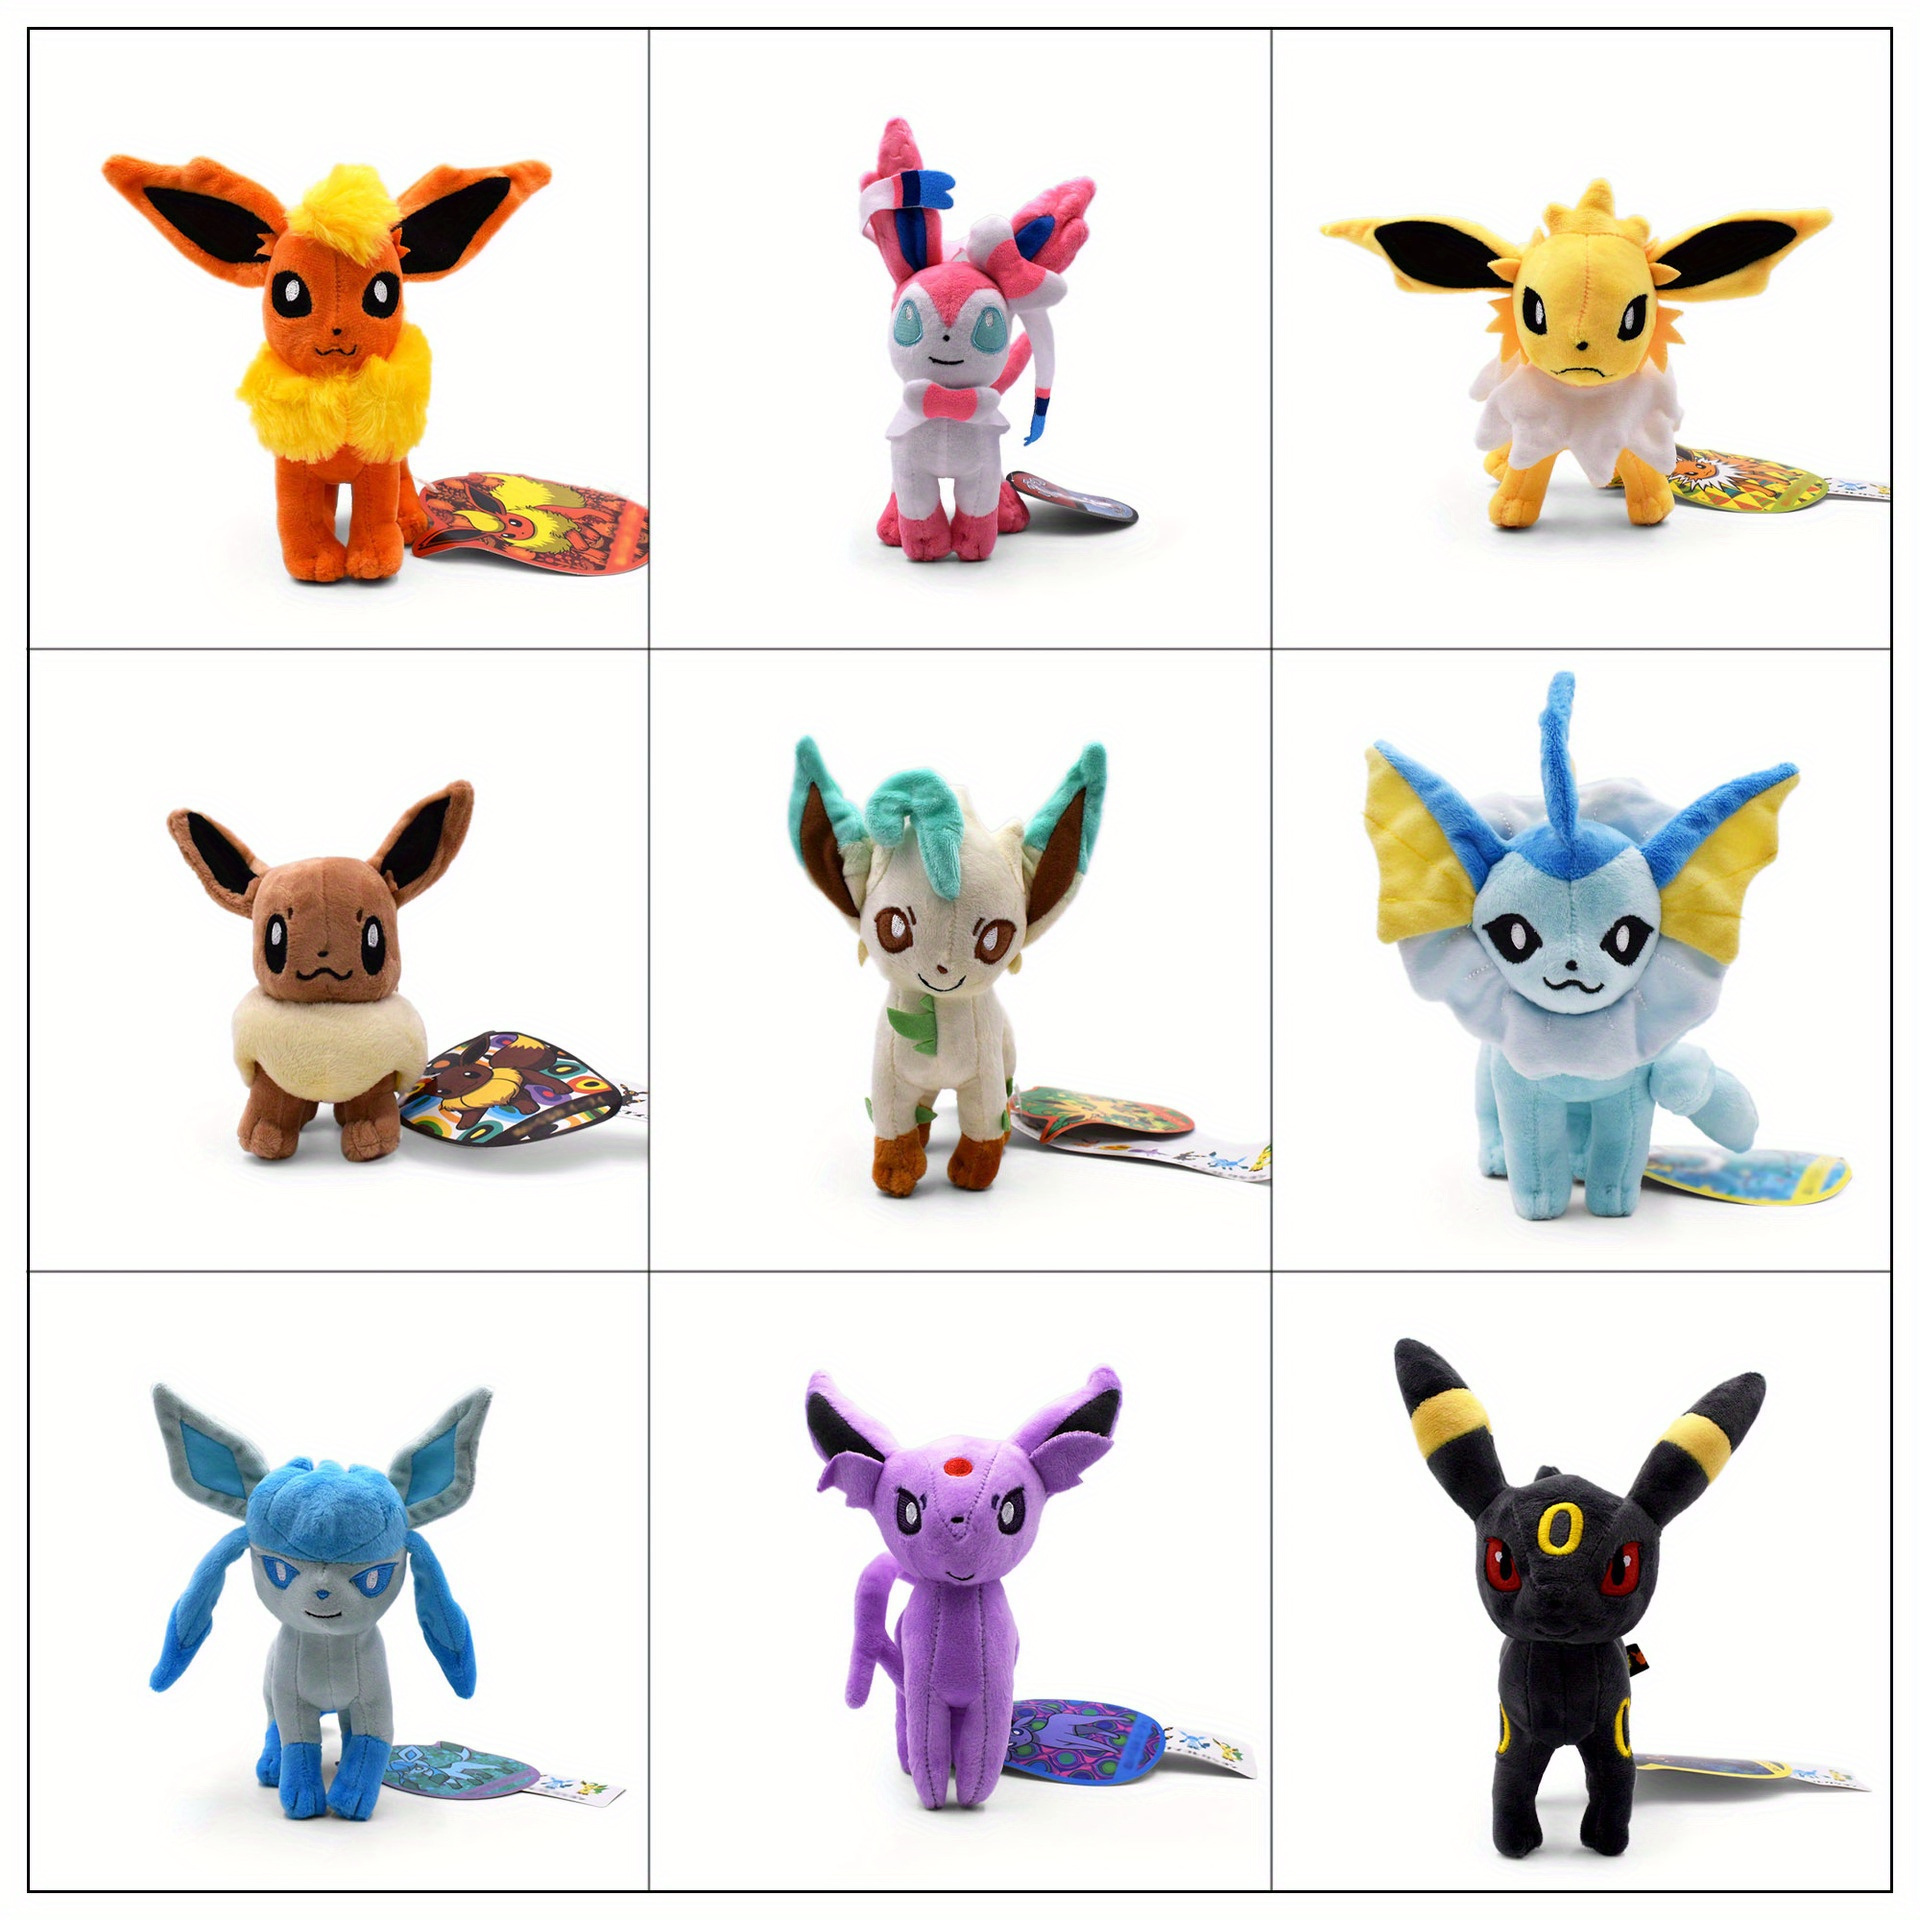  Pokemon 8 Espeon & Umbreon Plush 2-Pack - Officially Licensed  - Eevee Evolution - Add to Your Collection! Quality & Soft Collectible  Stuffed Animal Toy - Great Gift for Kids, Boys